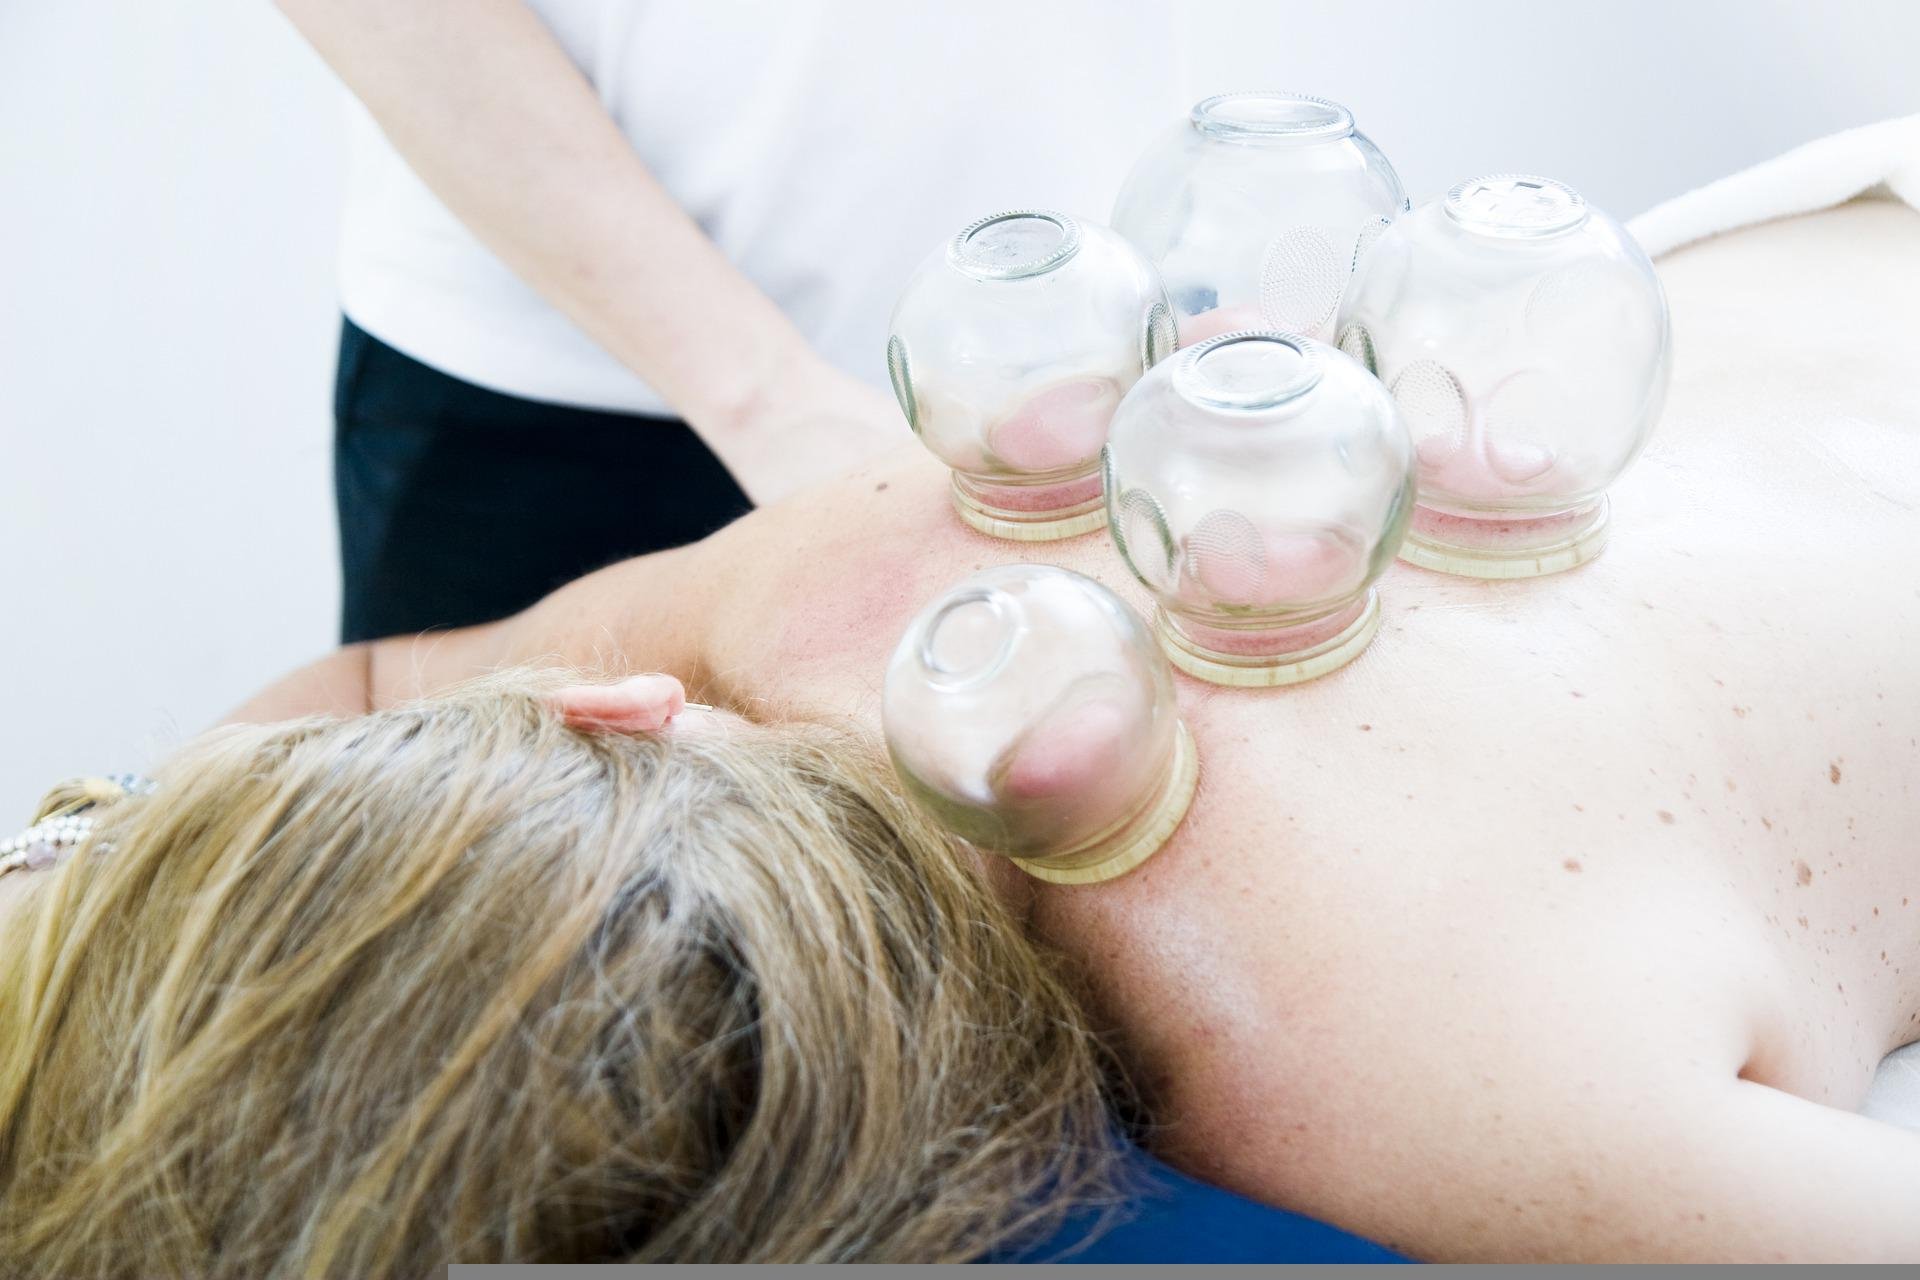 cupping-therapy-gadca5862f_1920.jpg